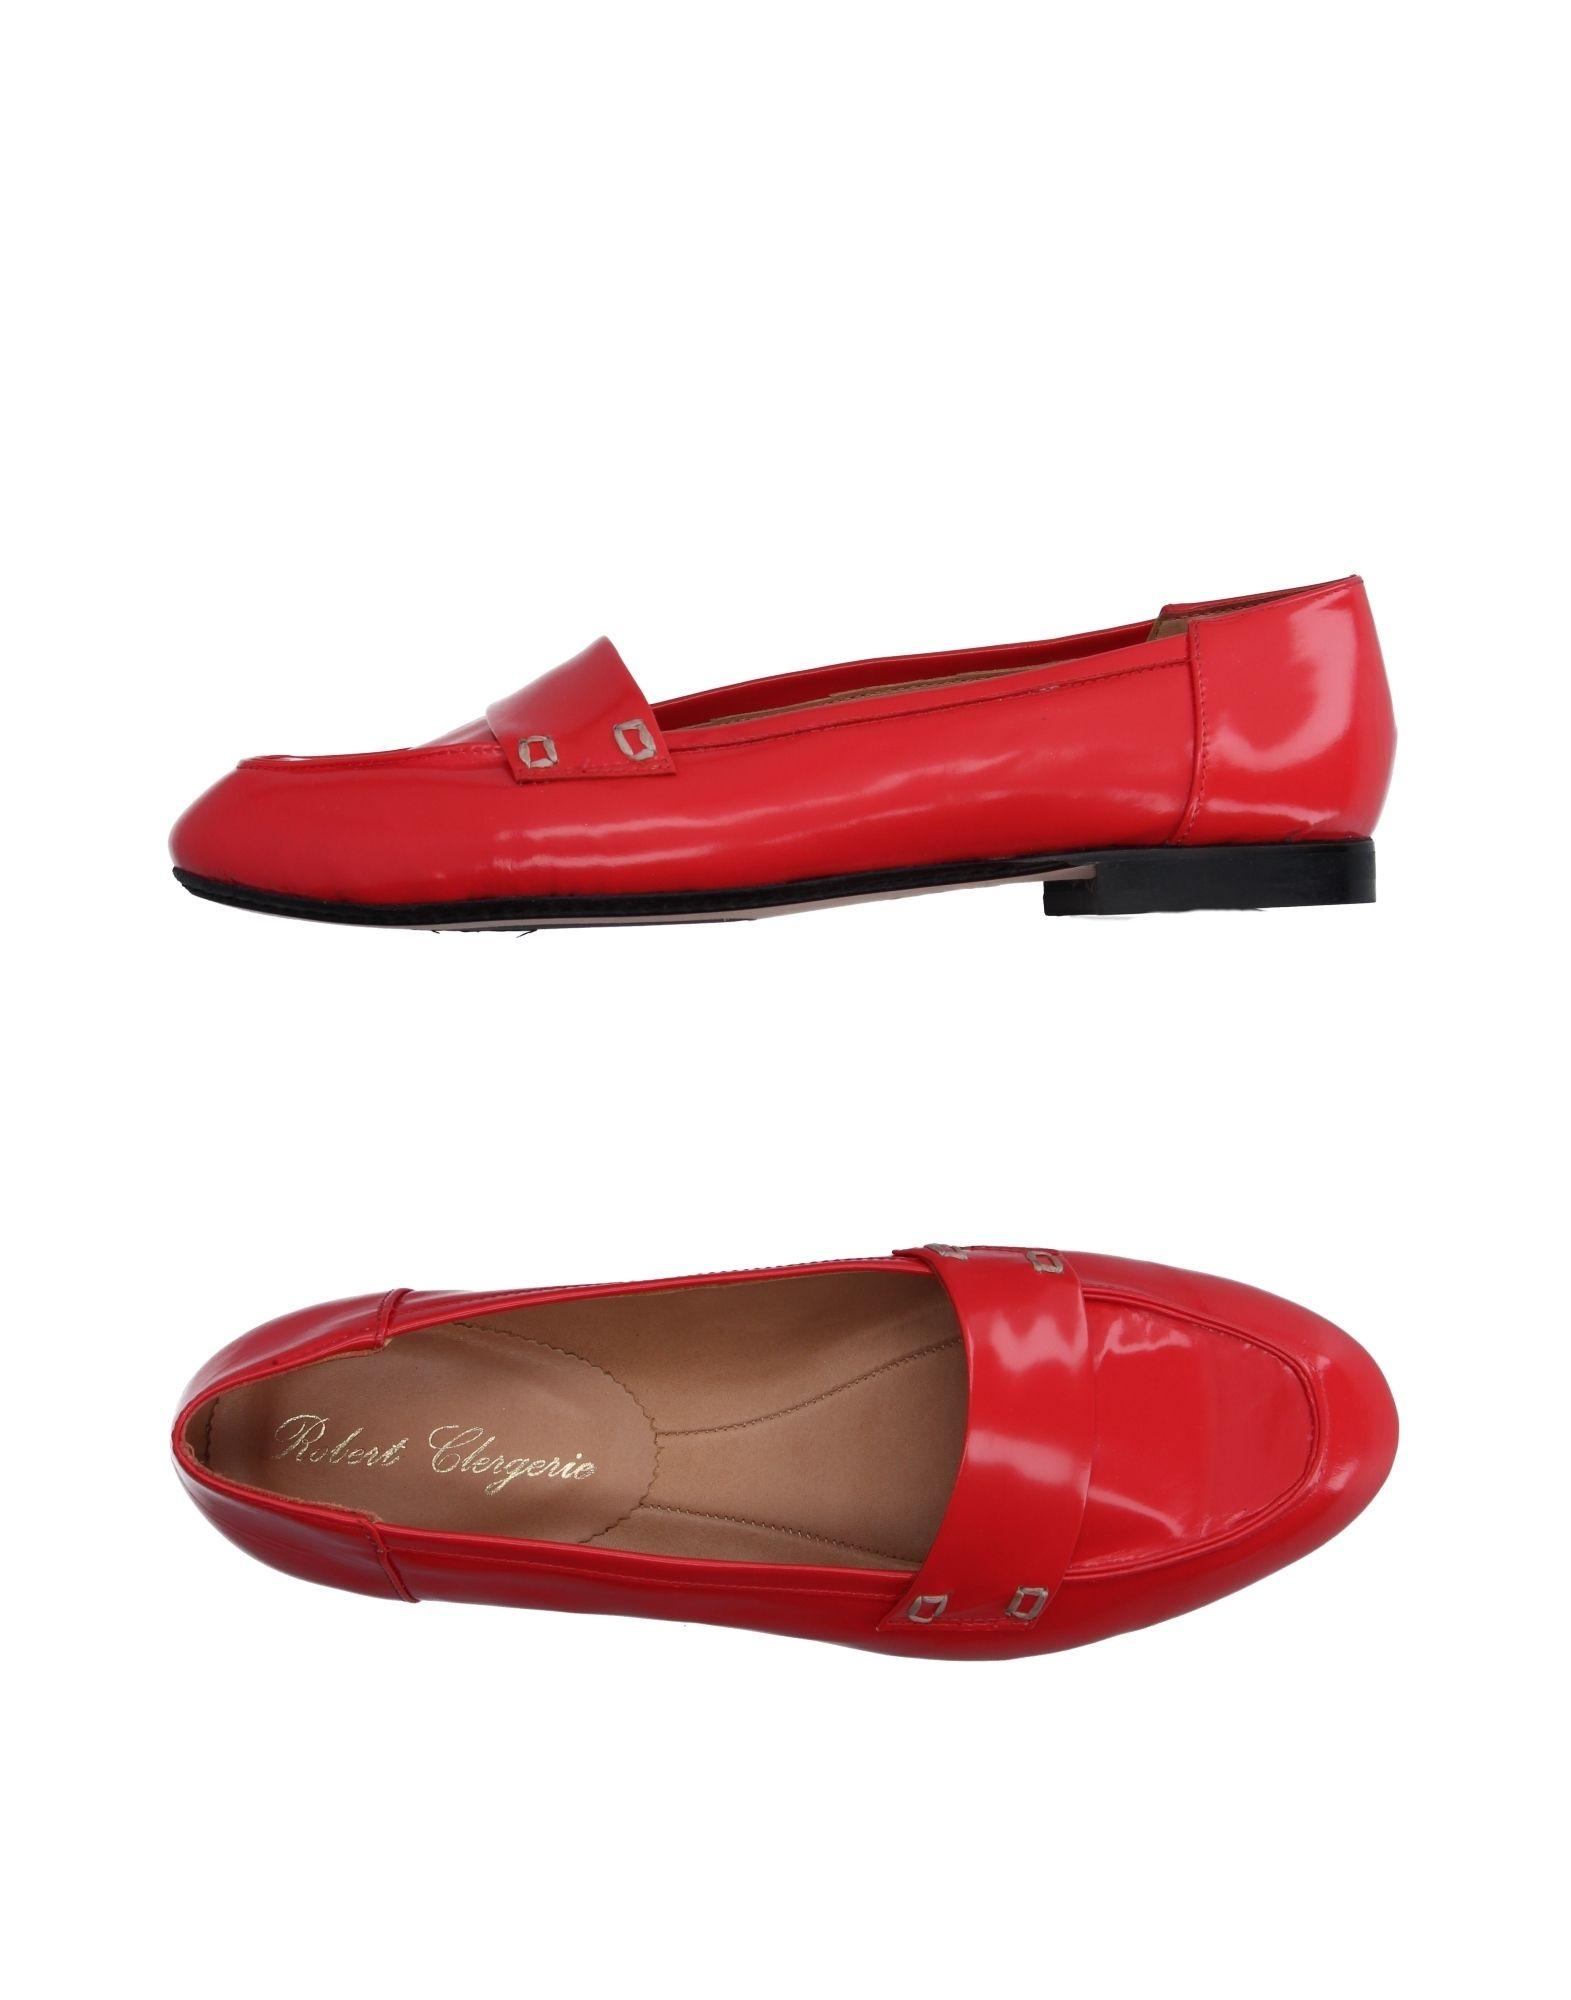 Lyst - Robert clergerie Loafer in Red